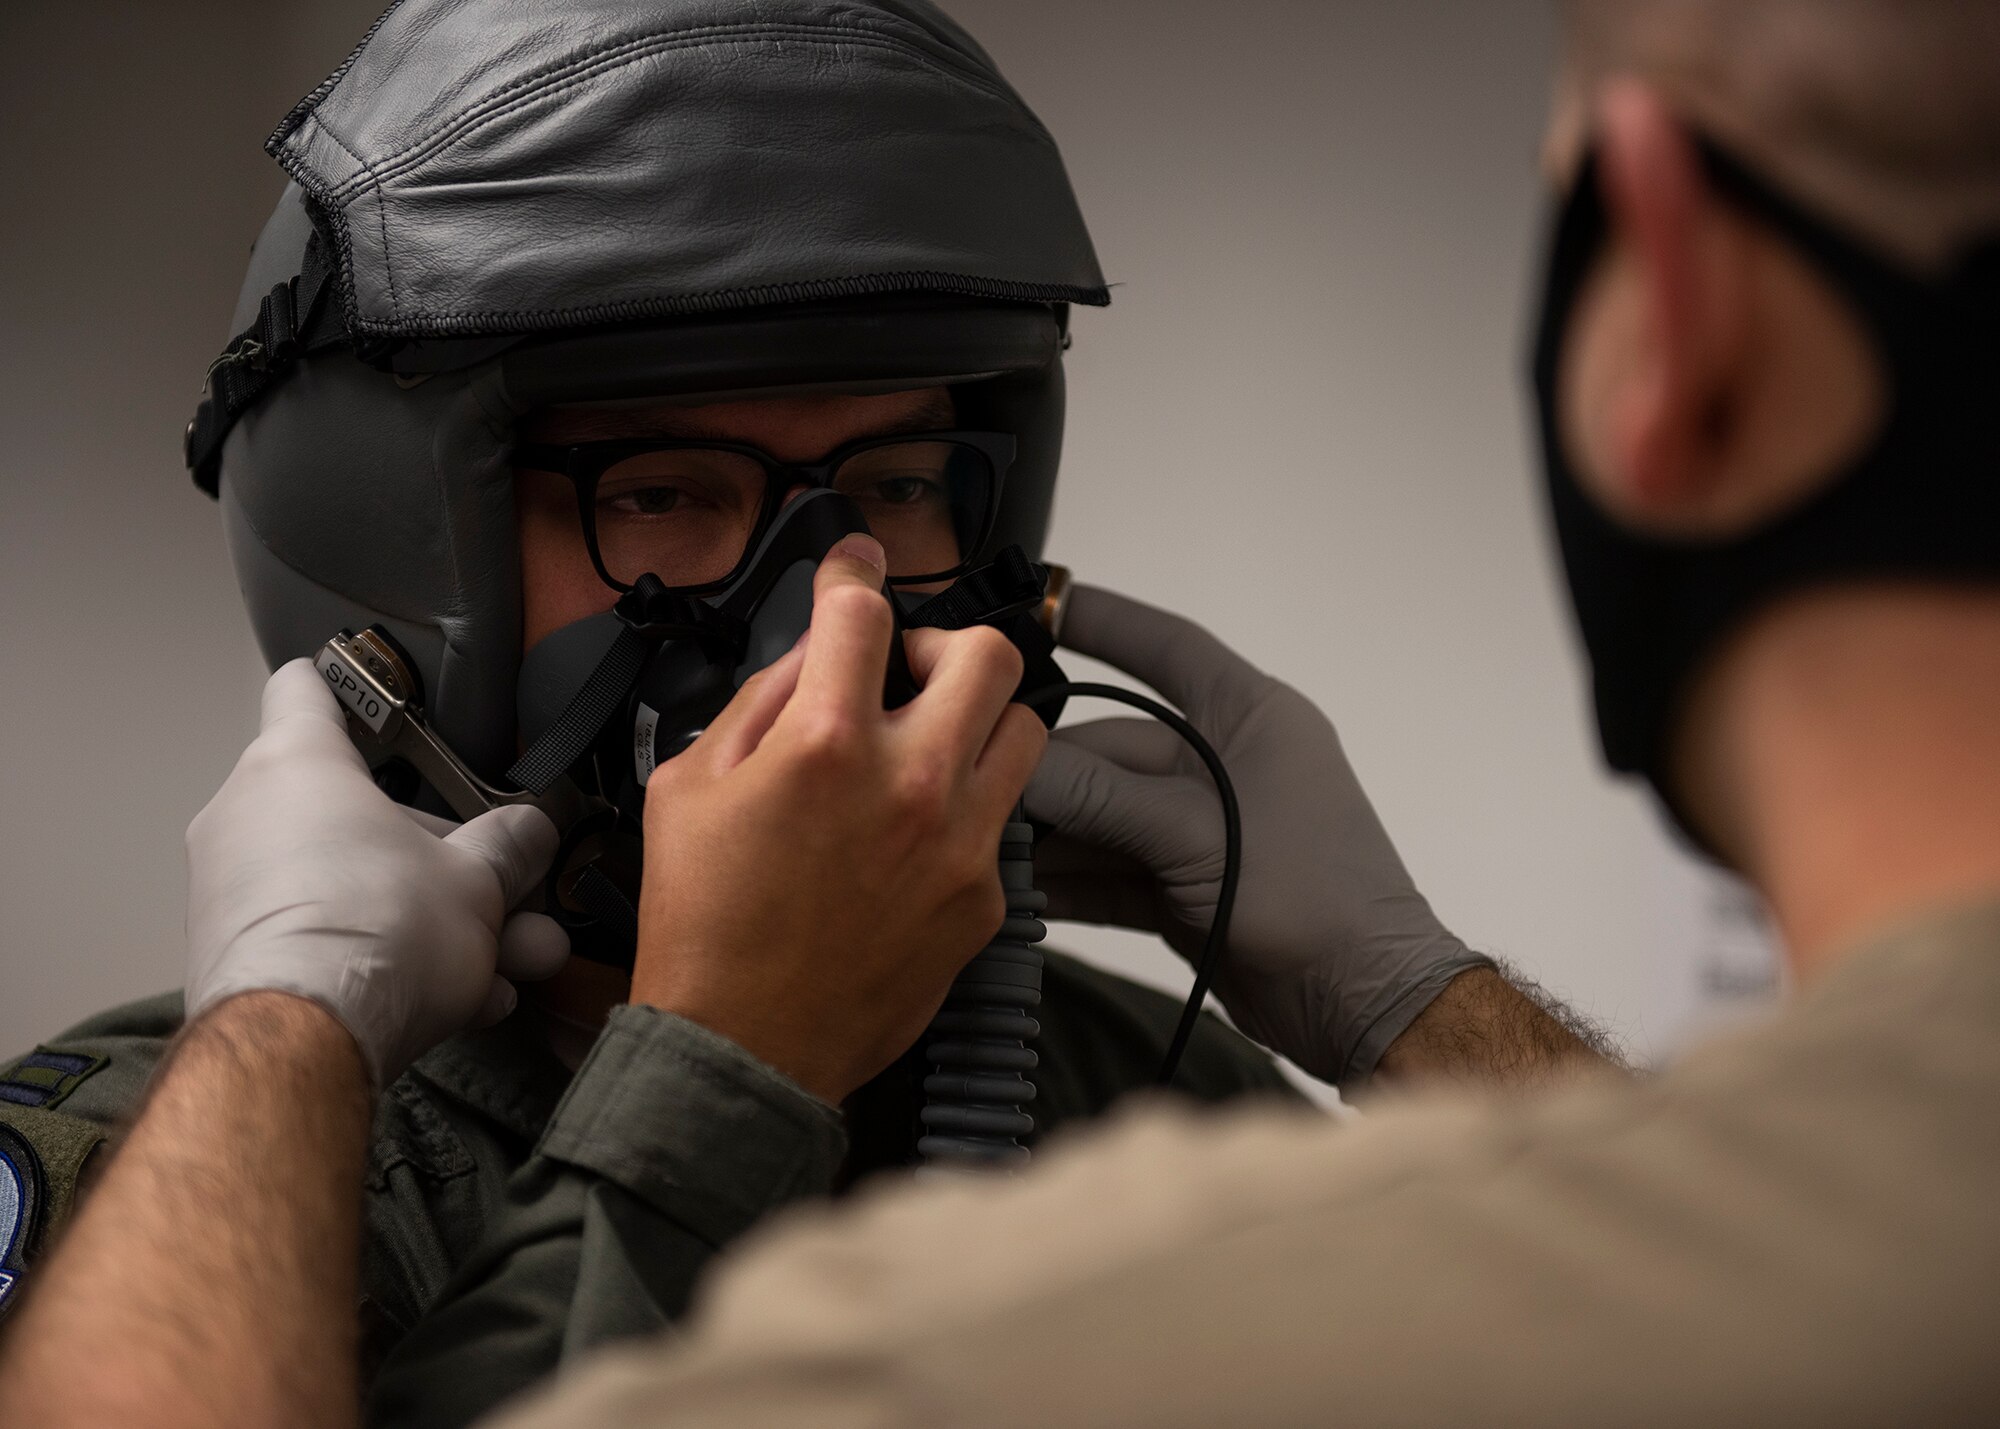 An Airman wearing a helmet holds an oxygen mask to their face while another Airman secures the oxygen mask to the helmet.